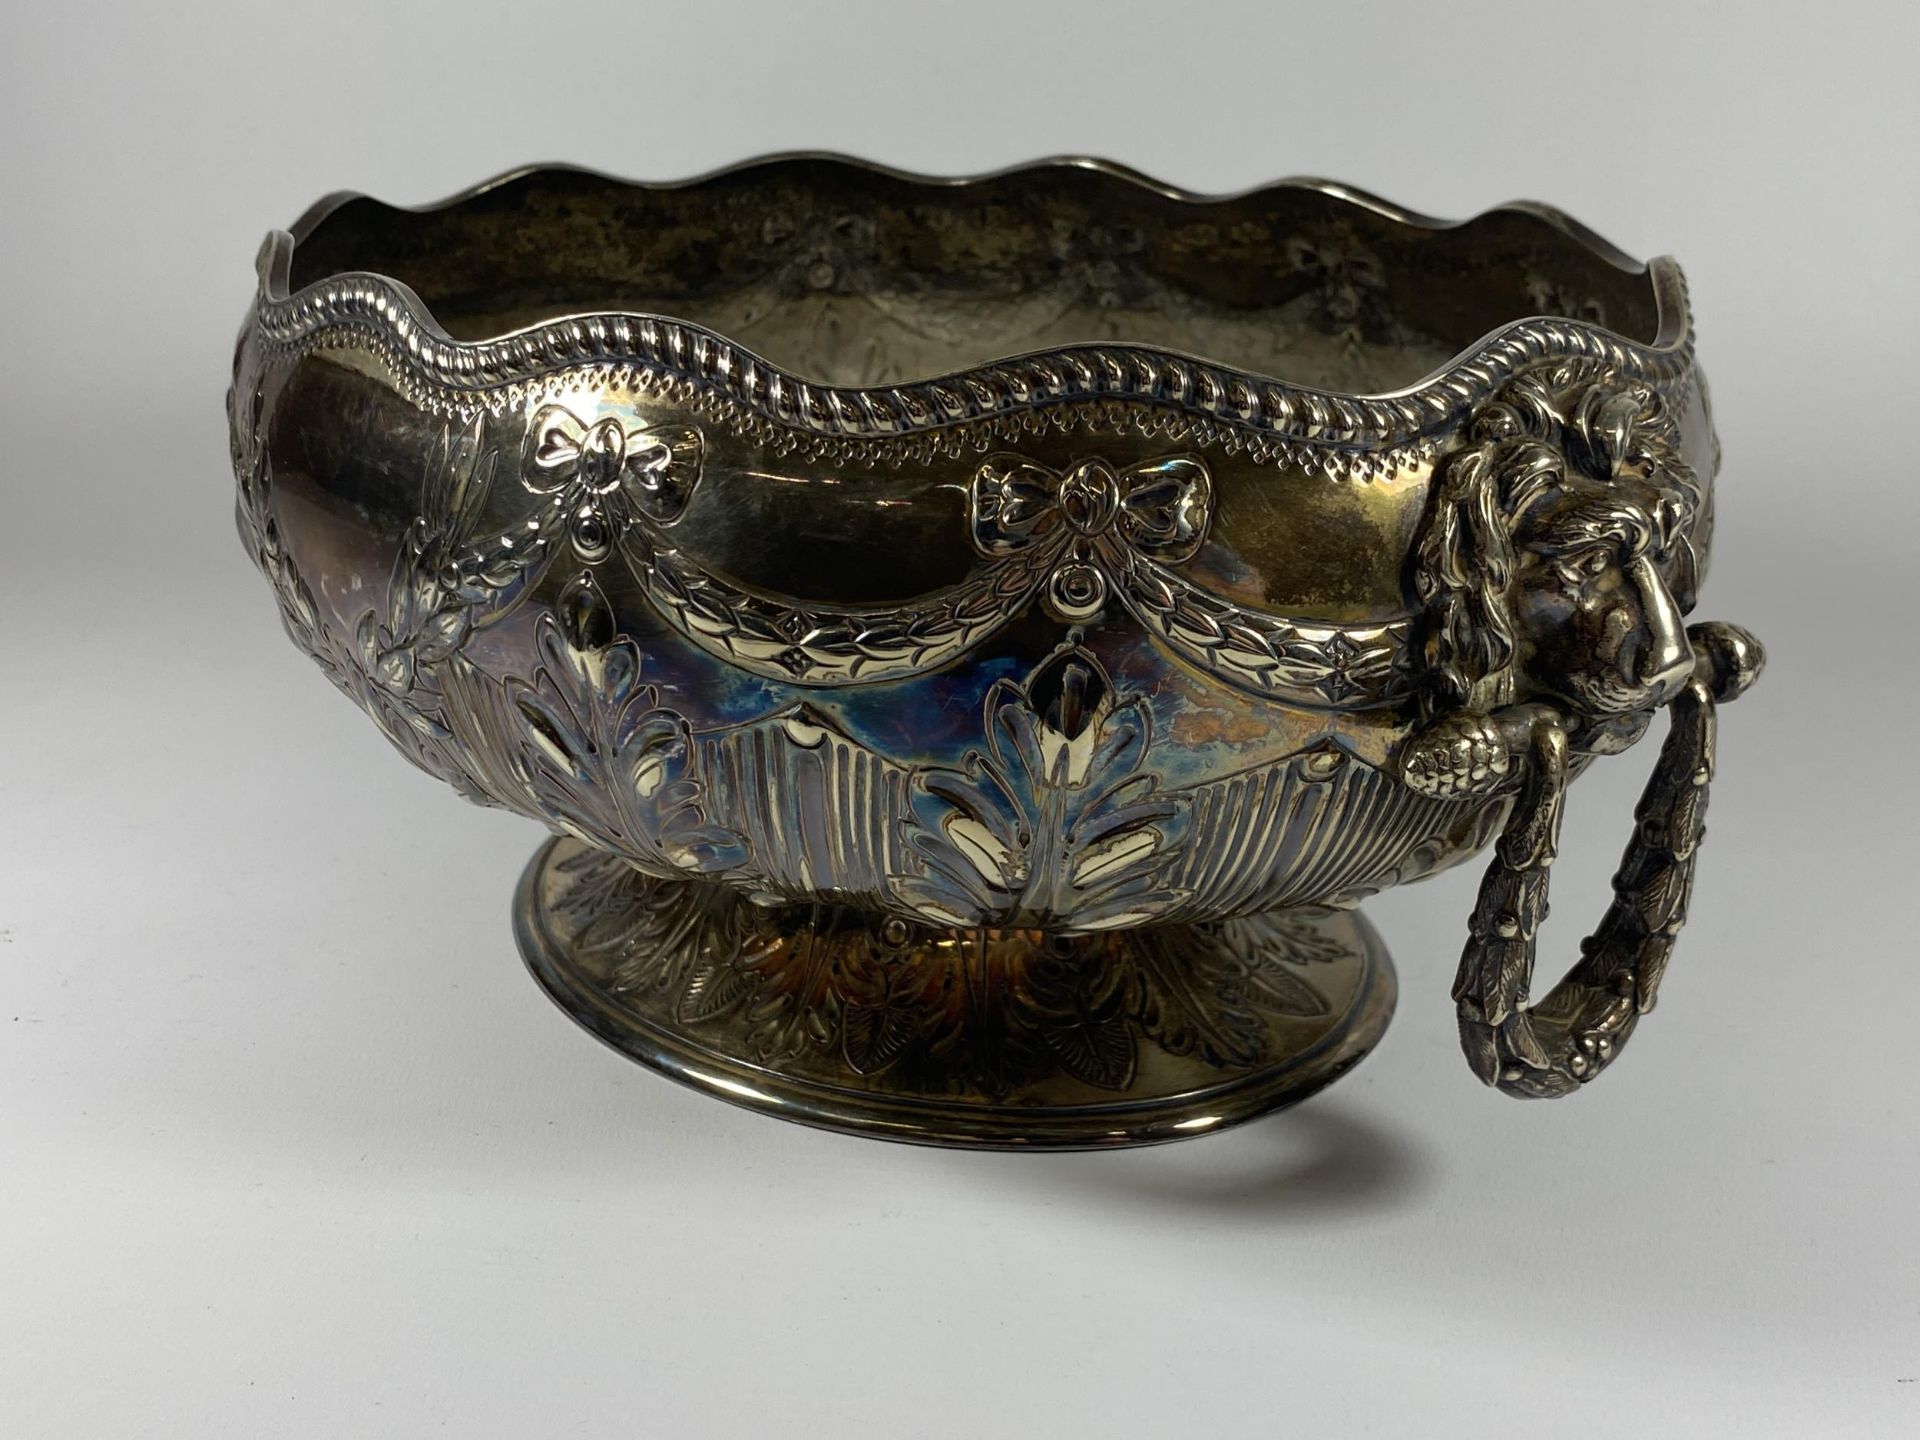 A VICTORIAN, DATED 1868, ELKINGTON & CO SILVER PLATED LION TWIN HANDLED PEDESTAL BOWL, LENGTH 30CM - Image 2 of 5